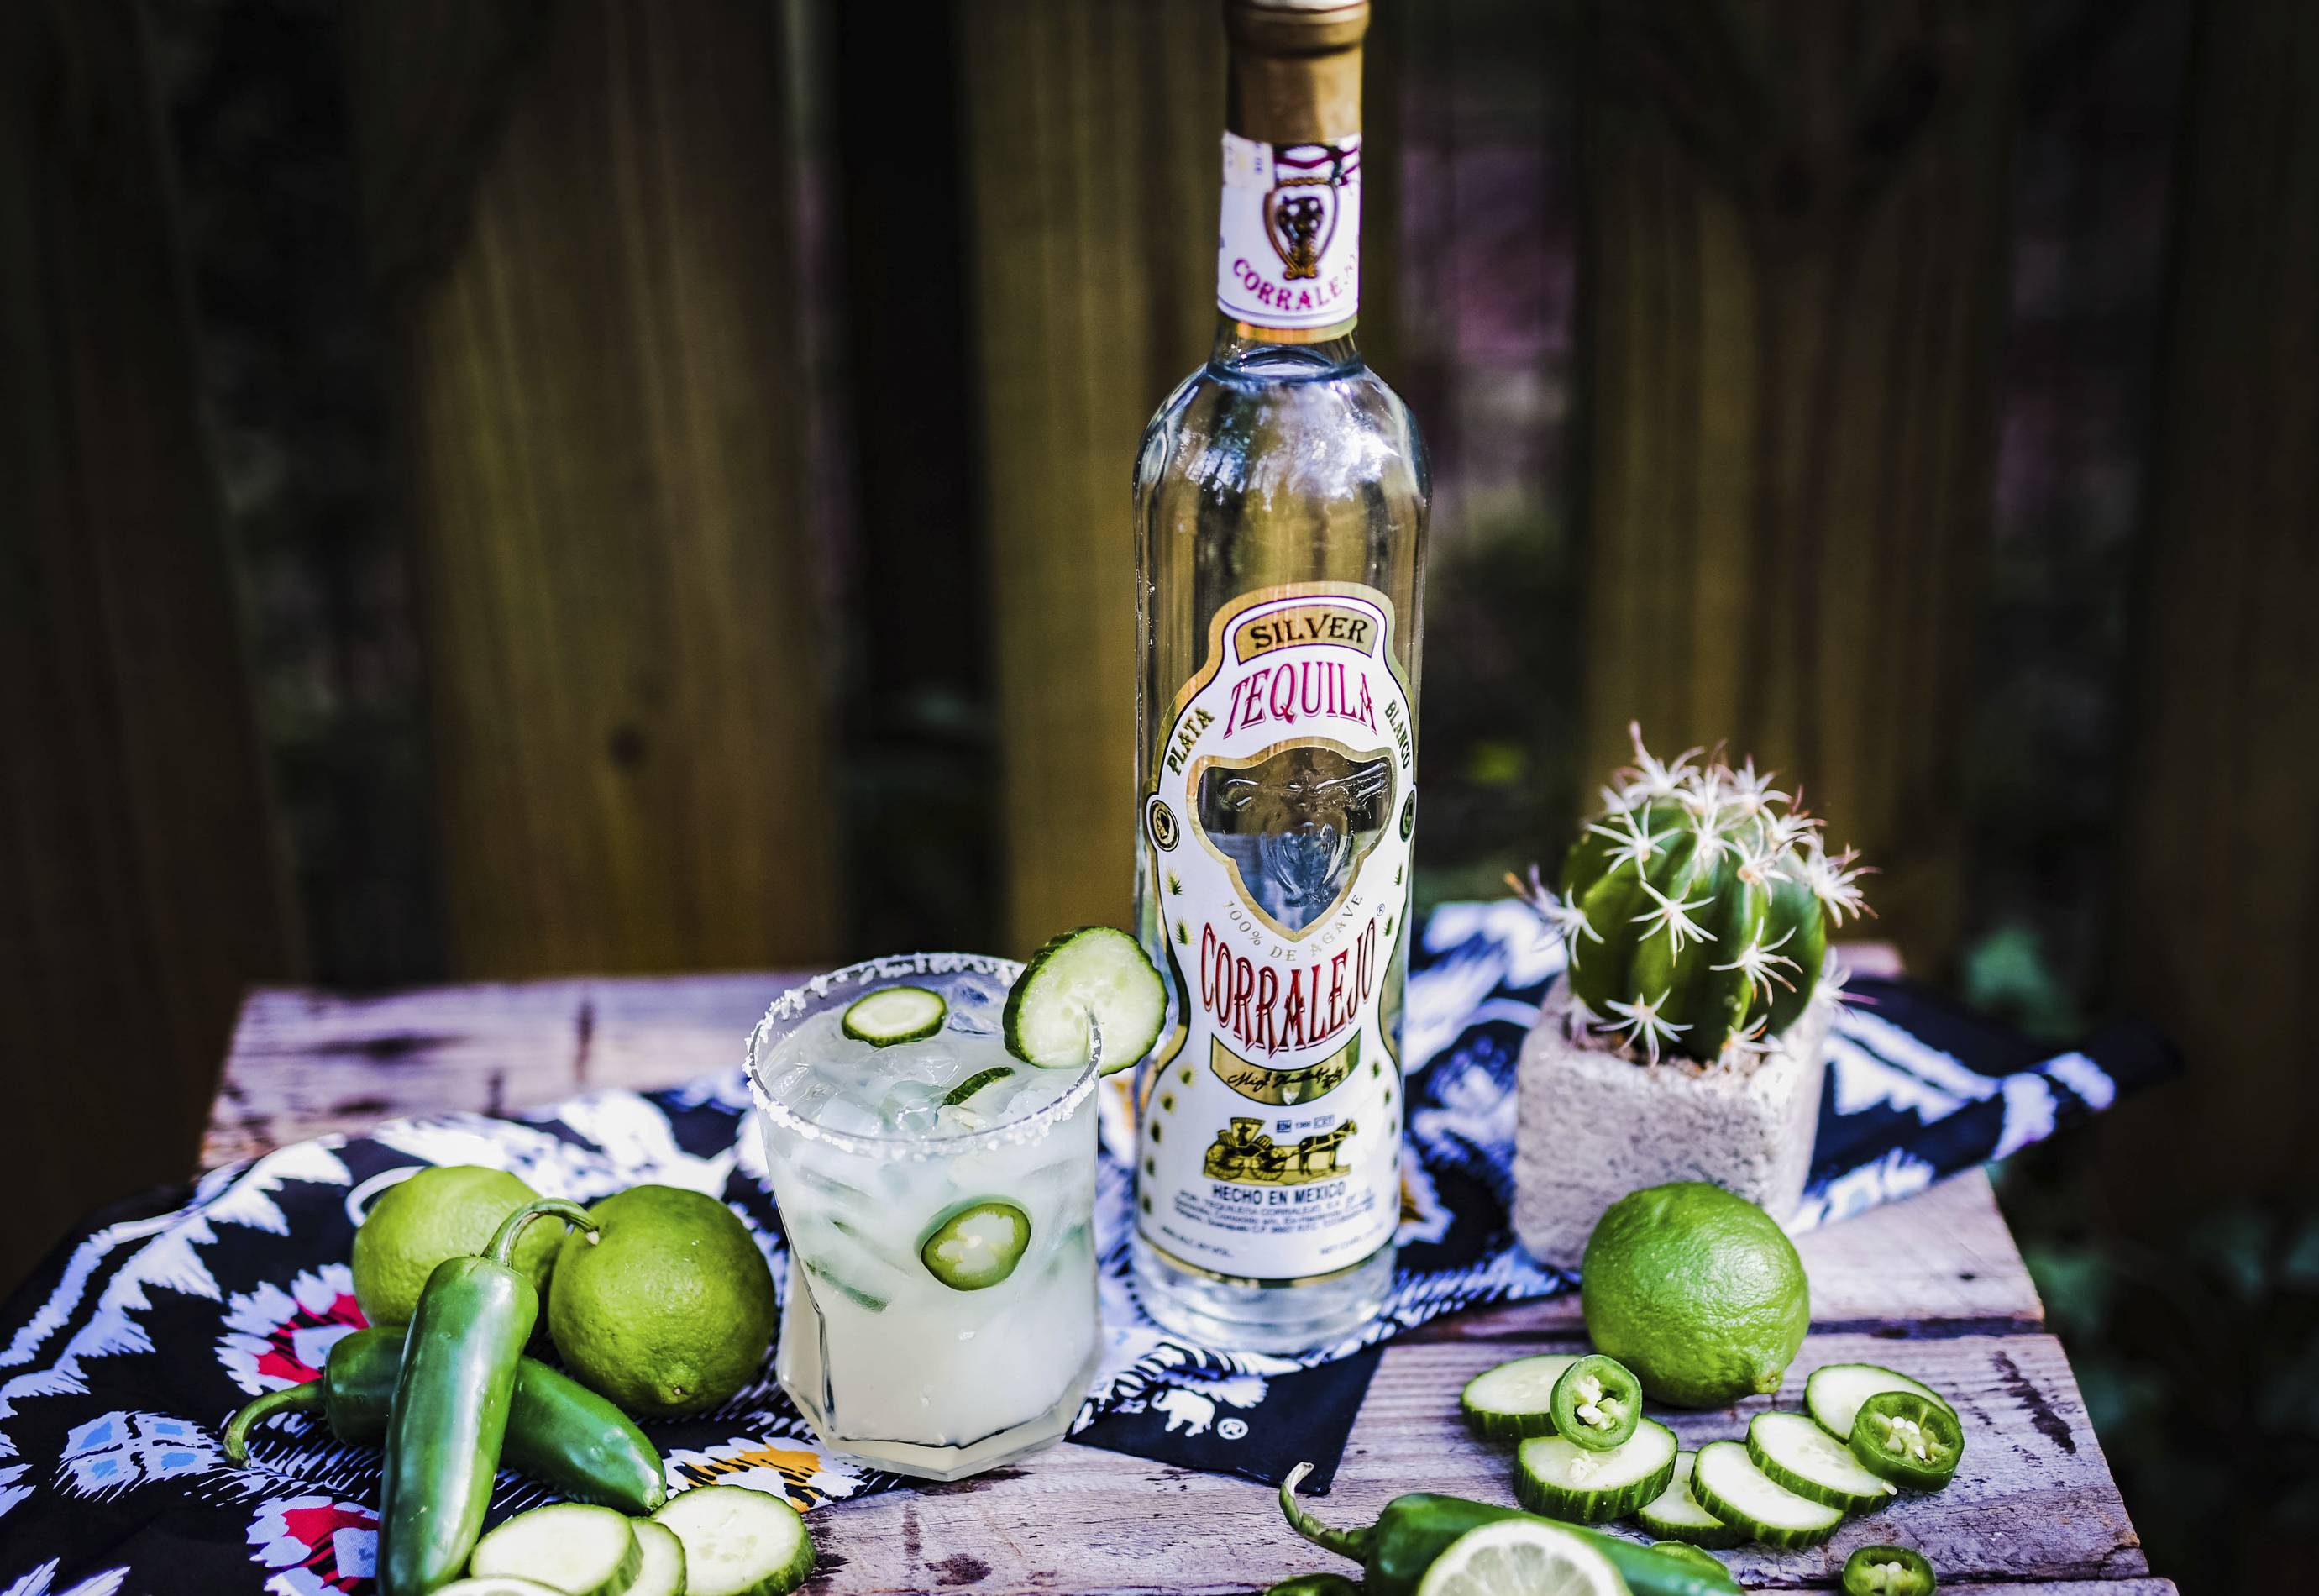 spicy cucumber margarita from corralejo tequila